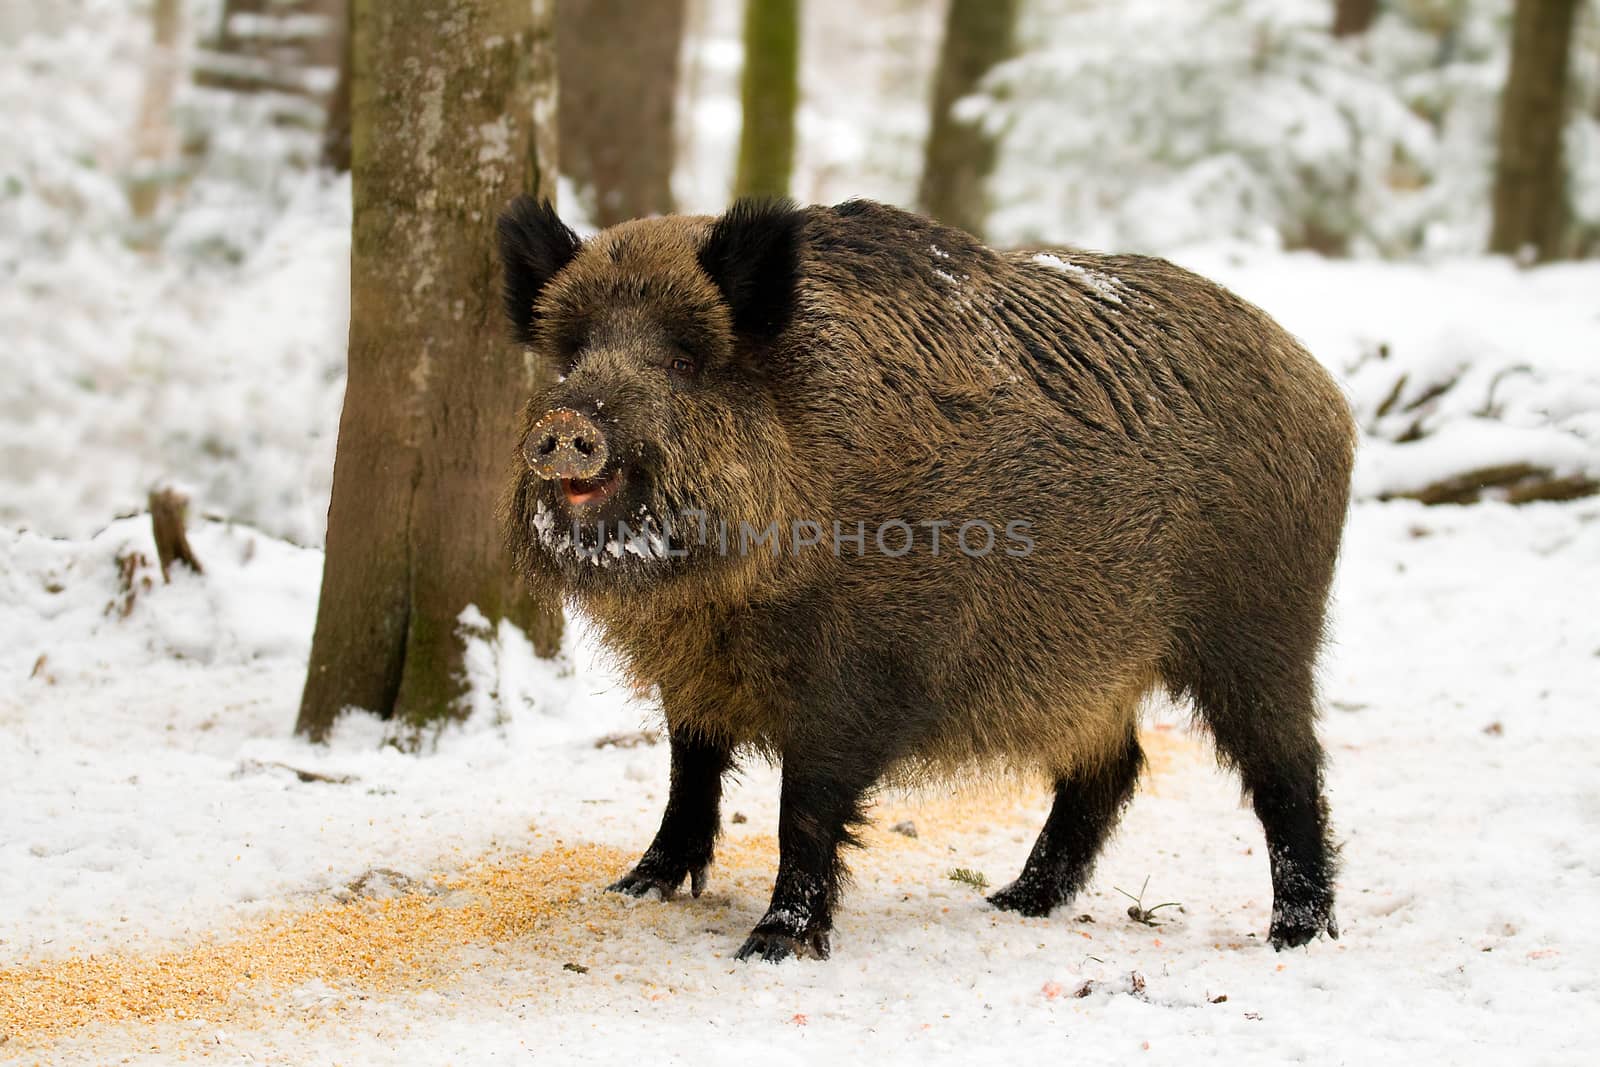 Wild boar (Sus scrofa) on the snow in the forest by Simon02